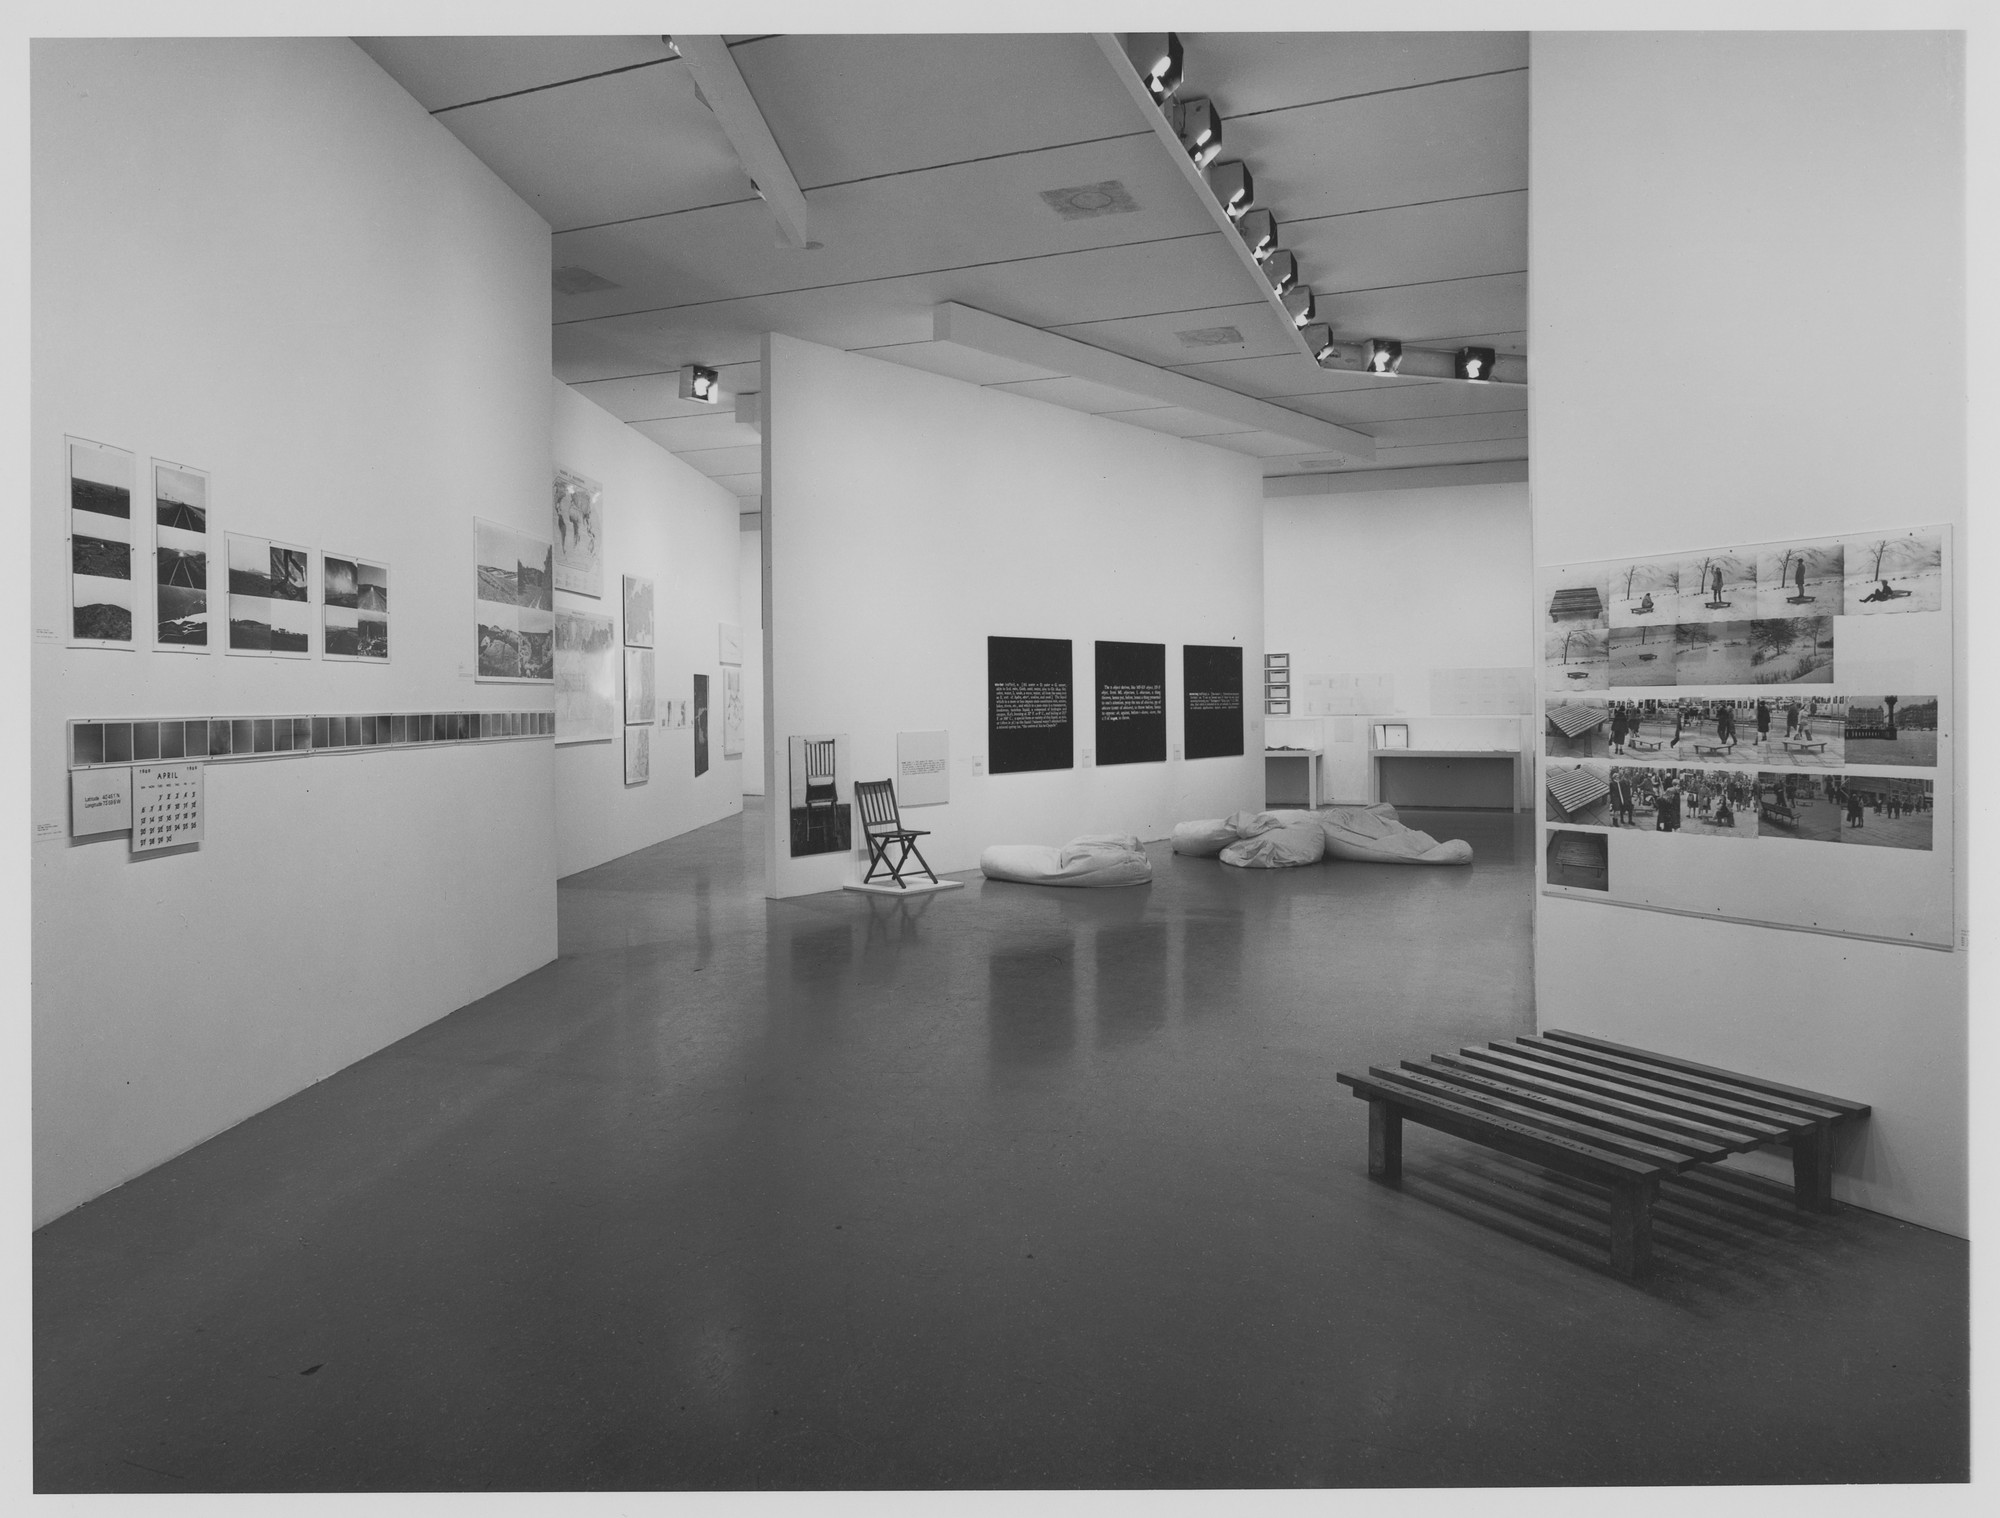 Installation view of the exhibition "Information" MoMA